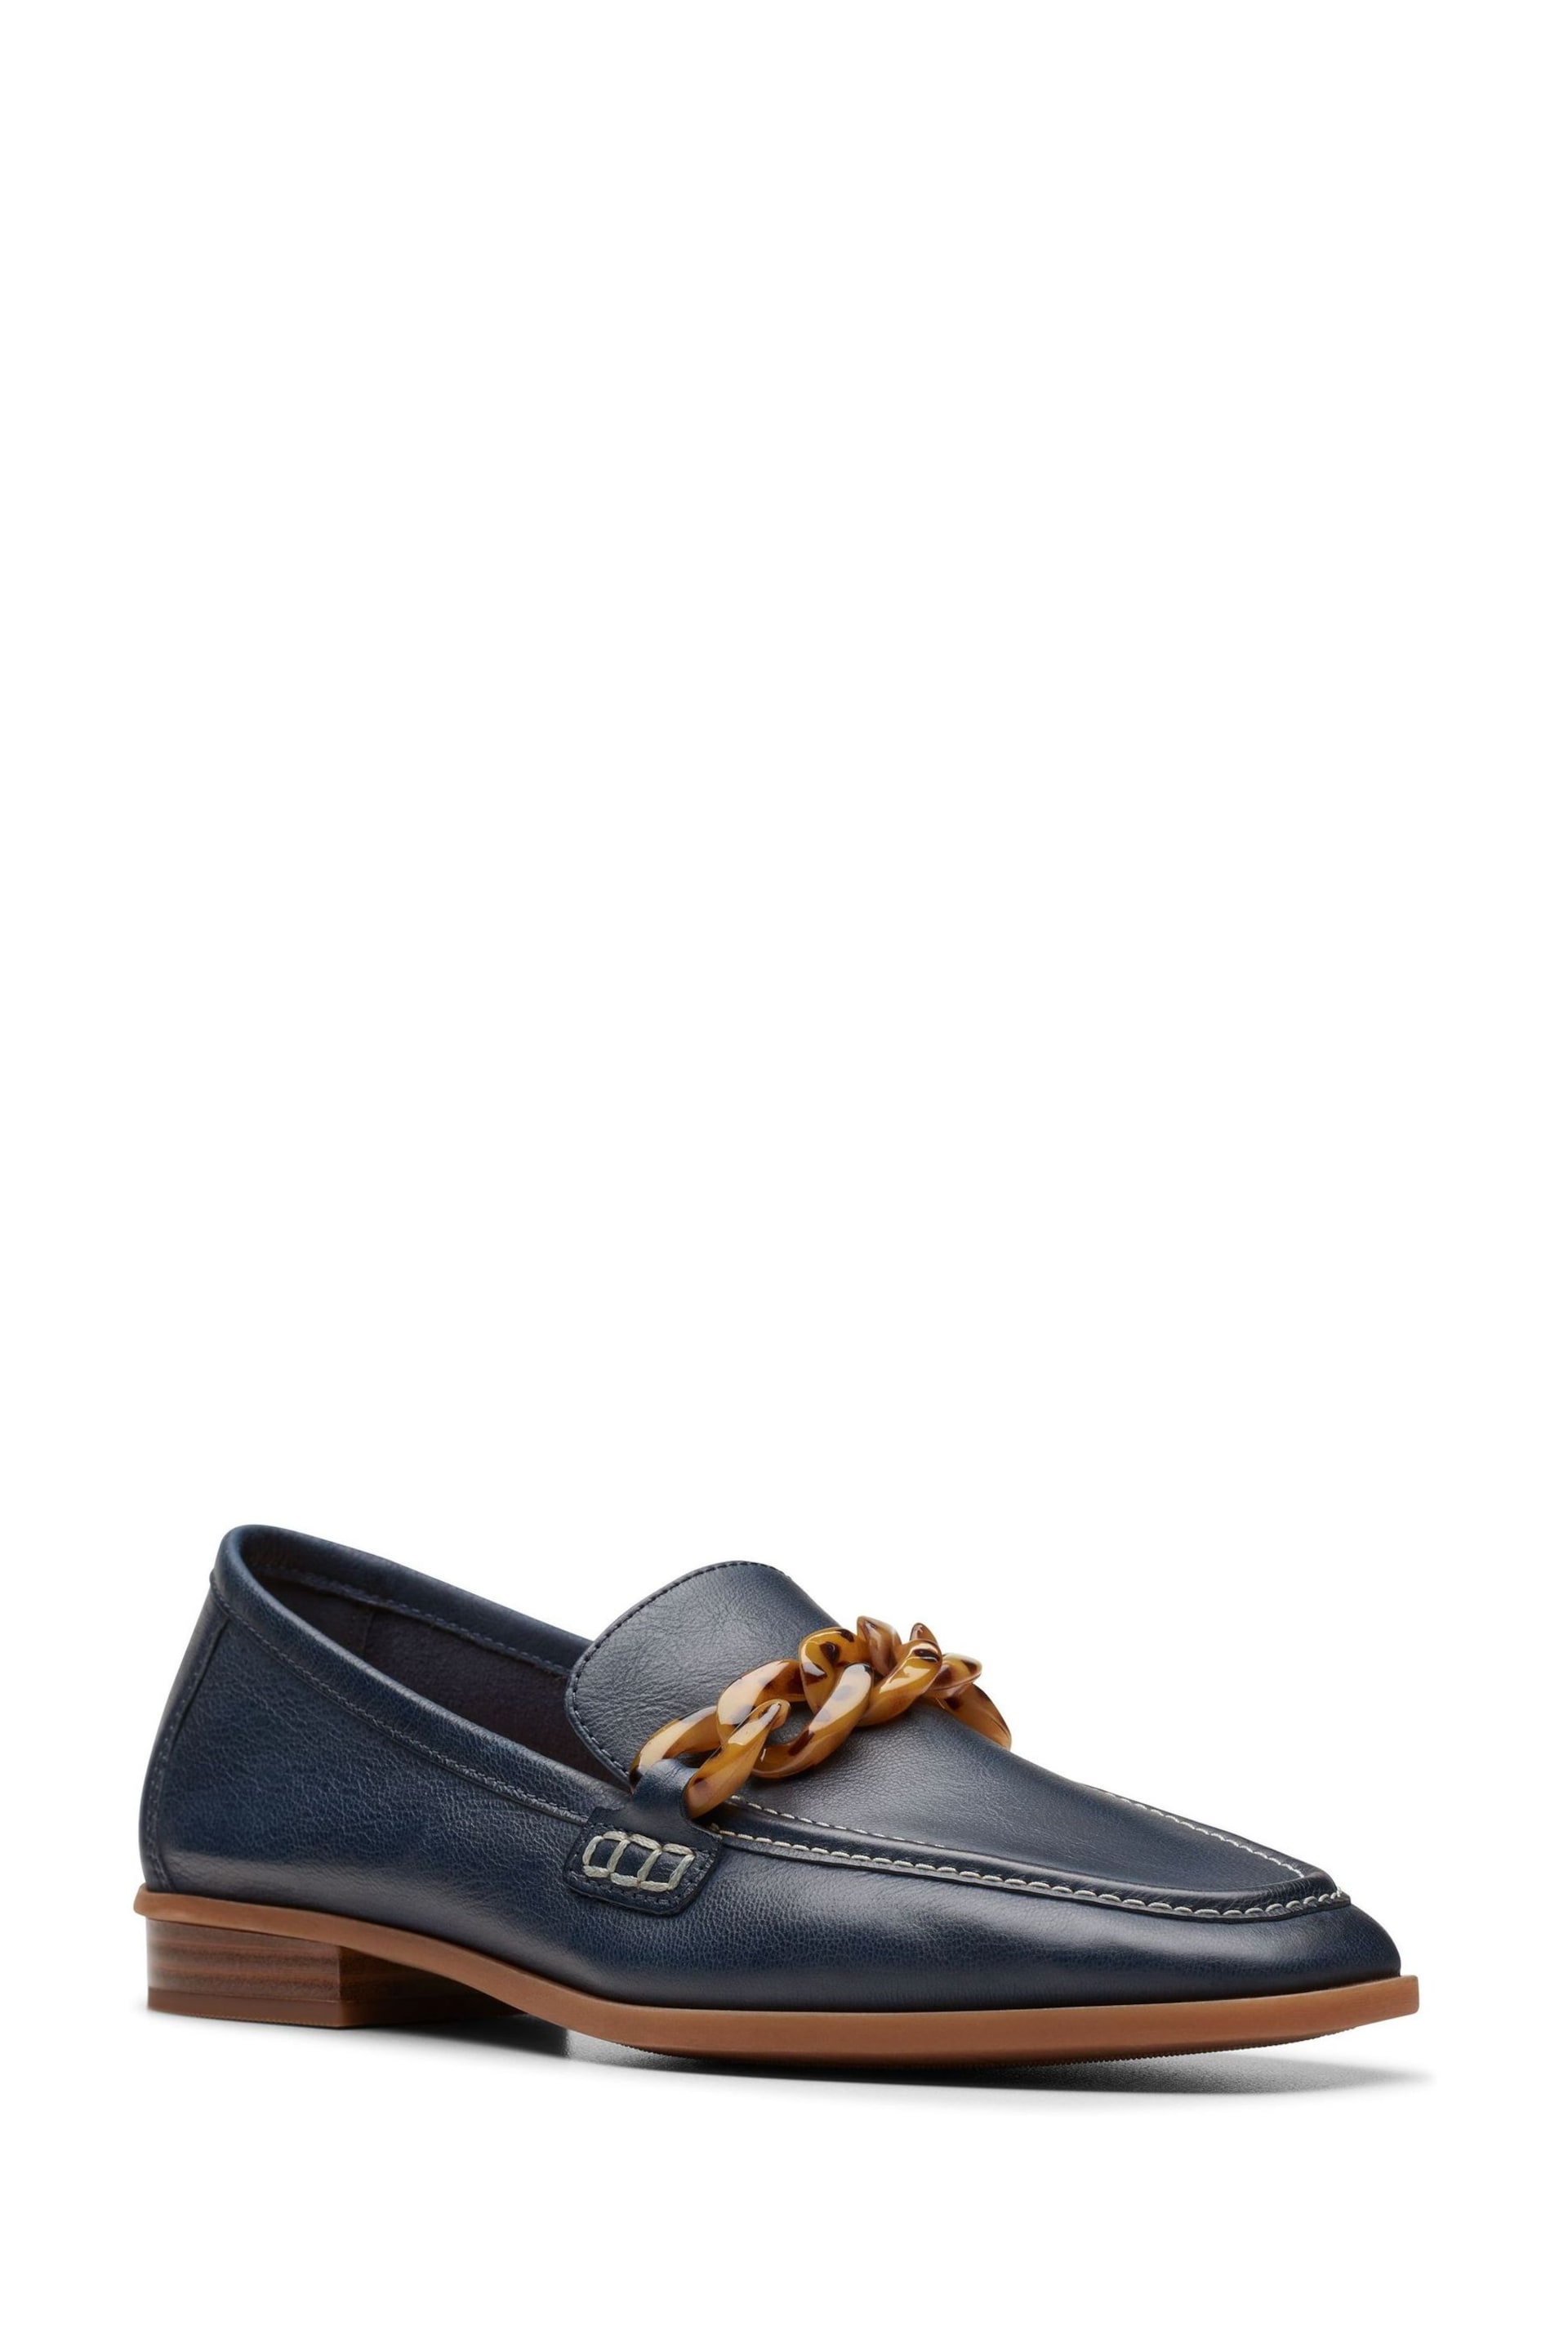 Clarks Blue Leather Sarafyna Iris Shoes - Image 3 of 8